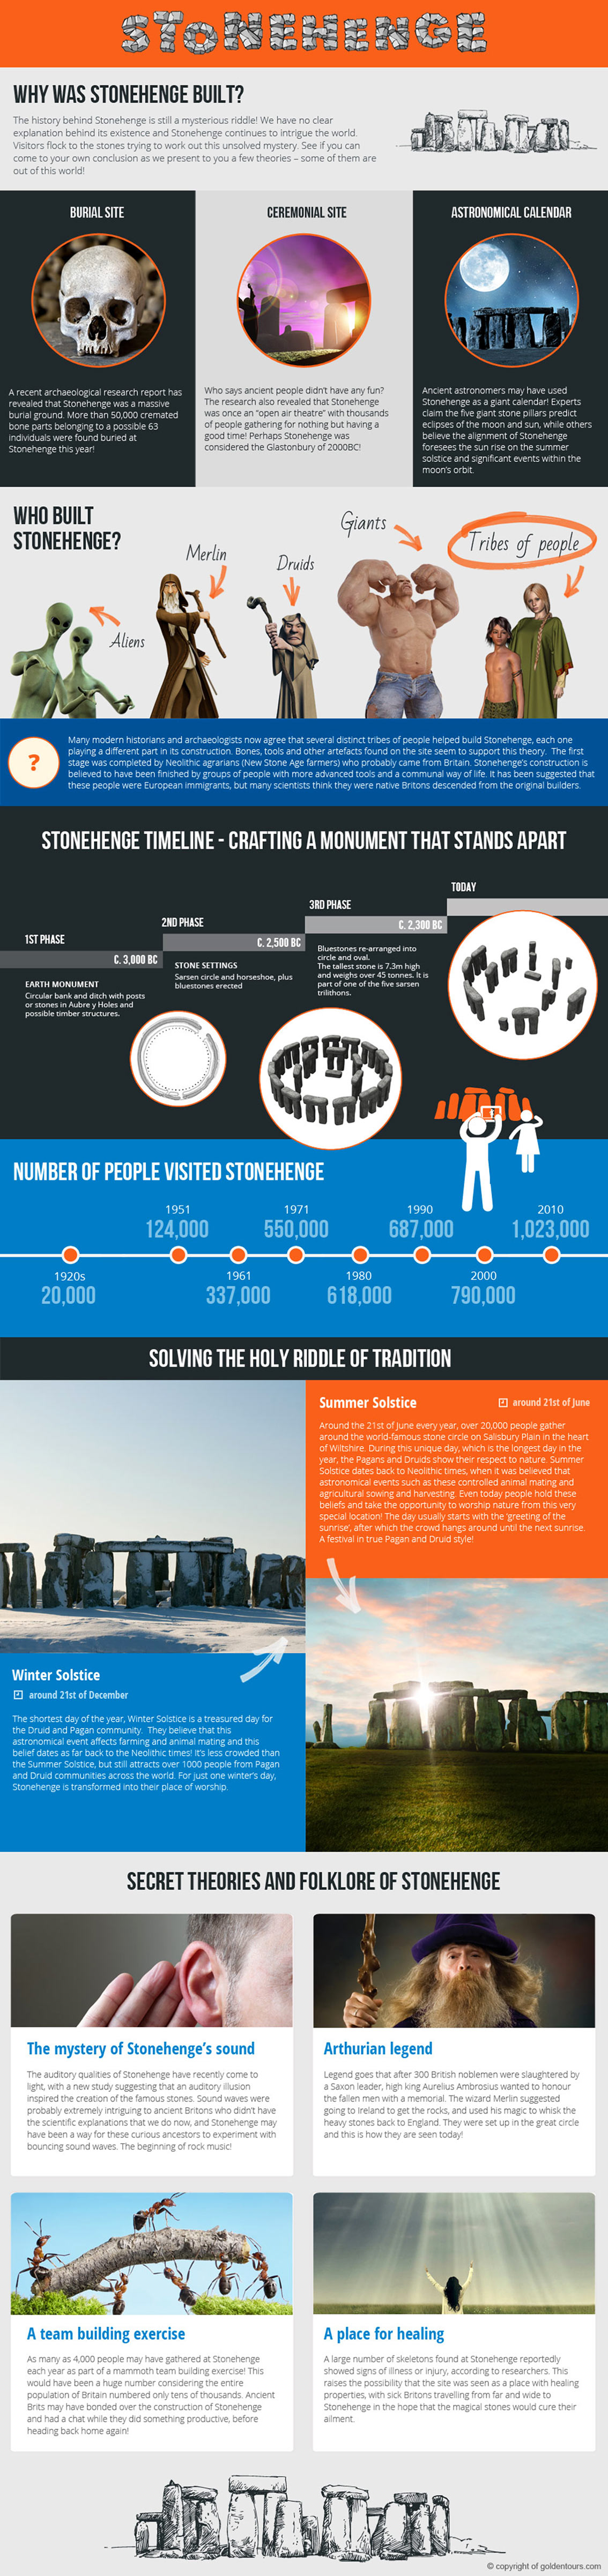 Stonehenge History Facts and Theories Infographic